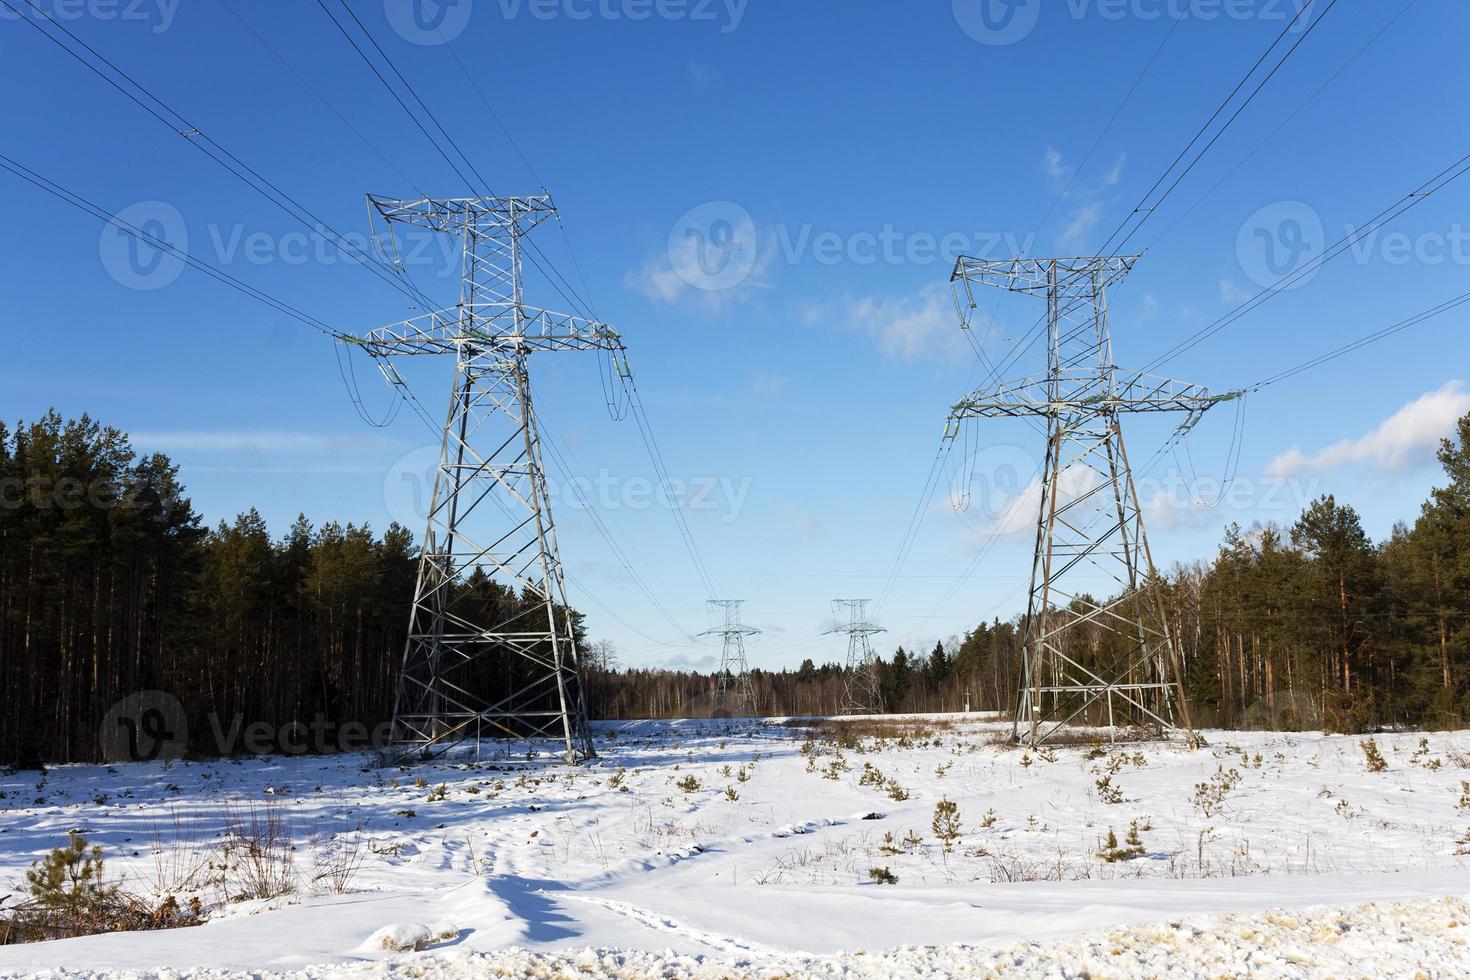 power lines in winter photo